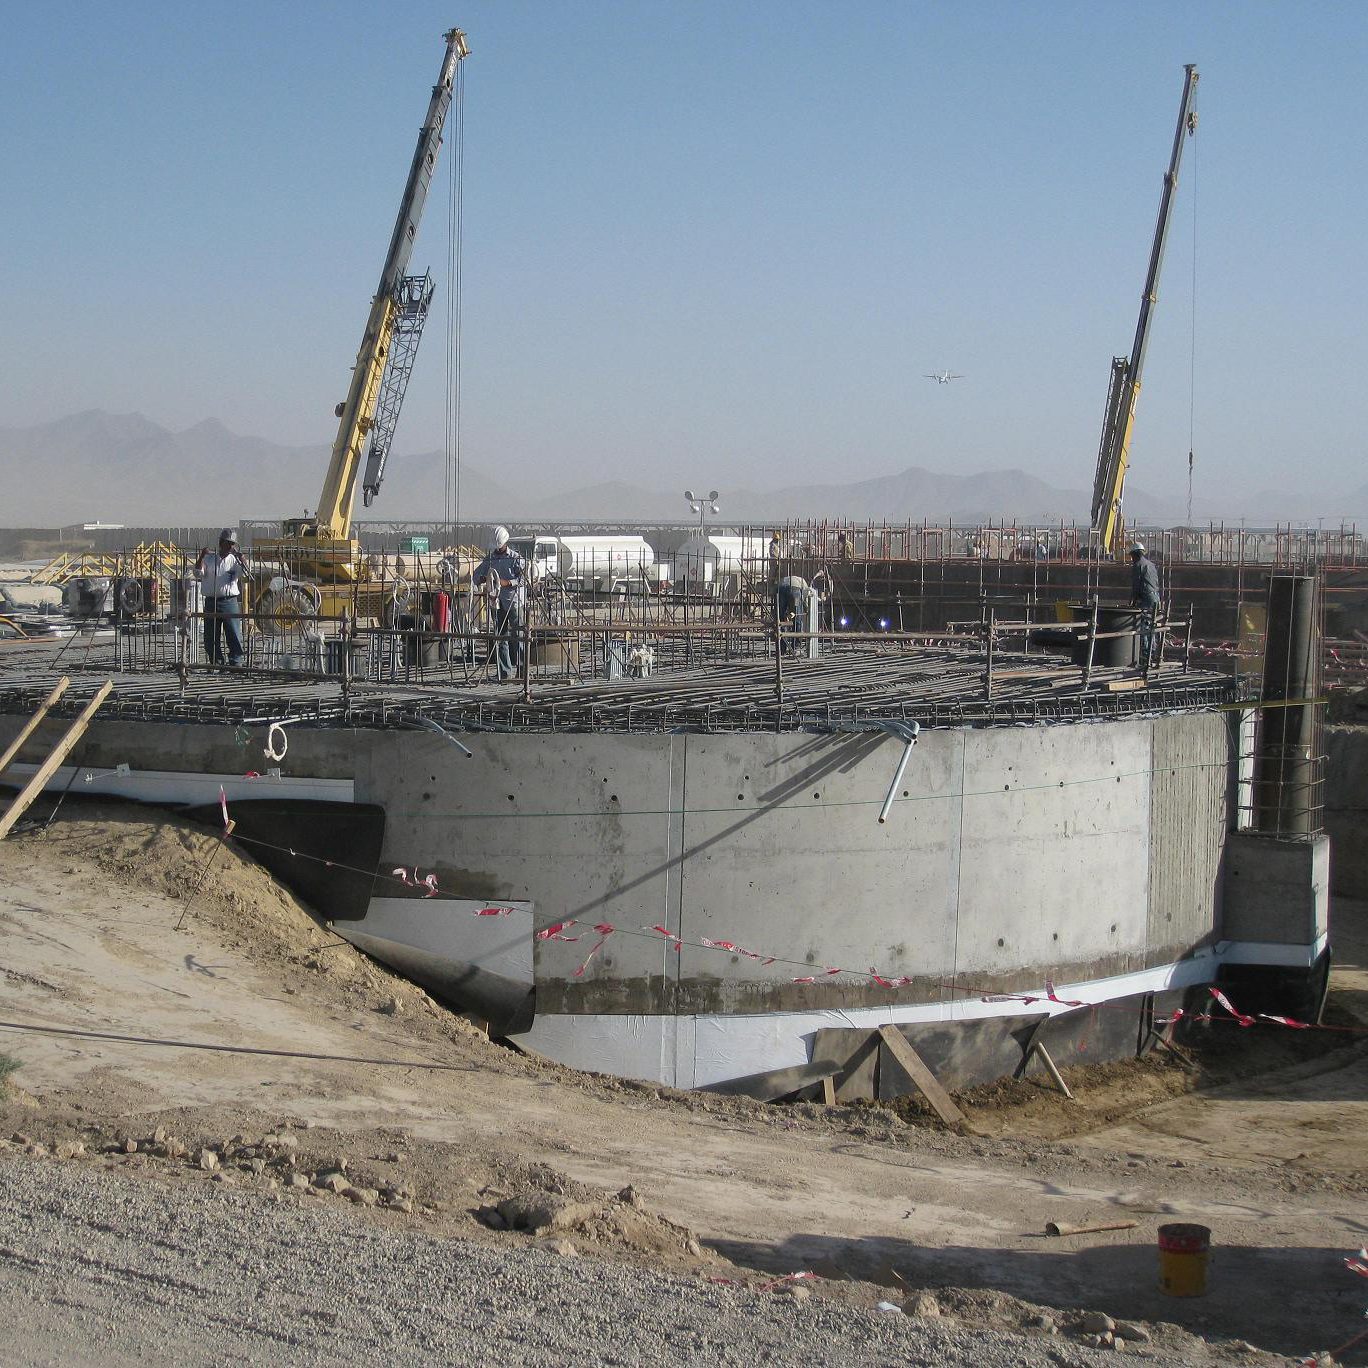 Workers installing forms for a welded storage tank